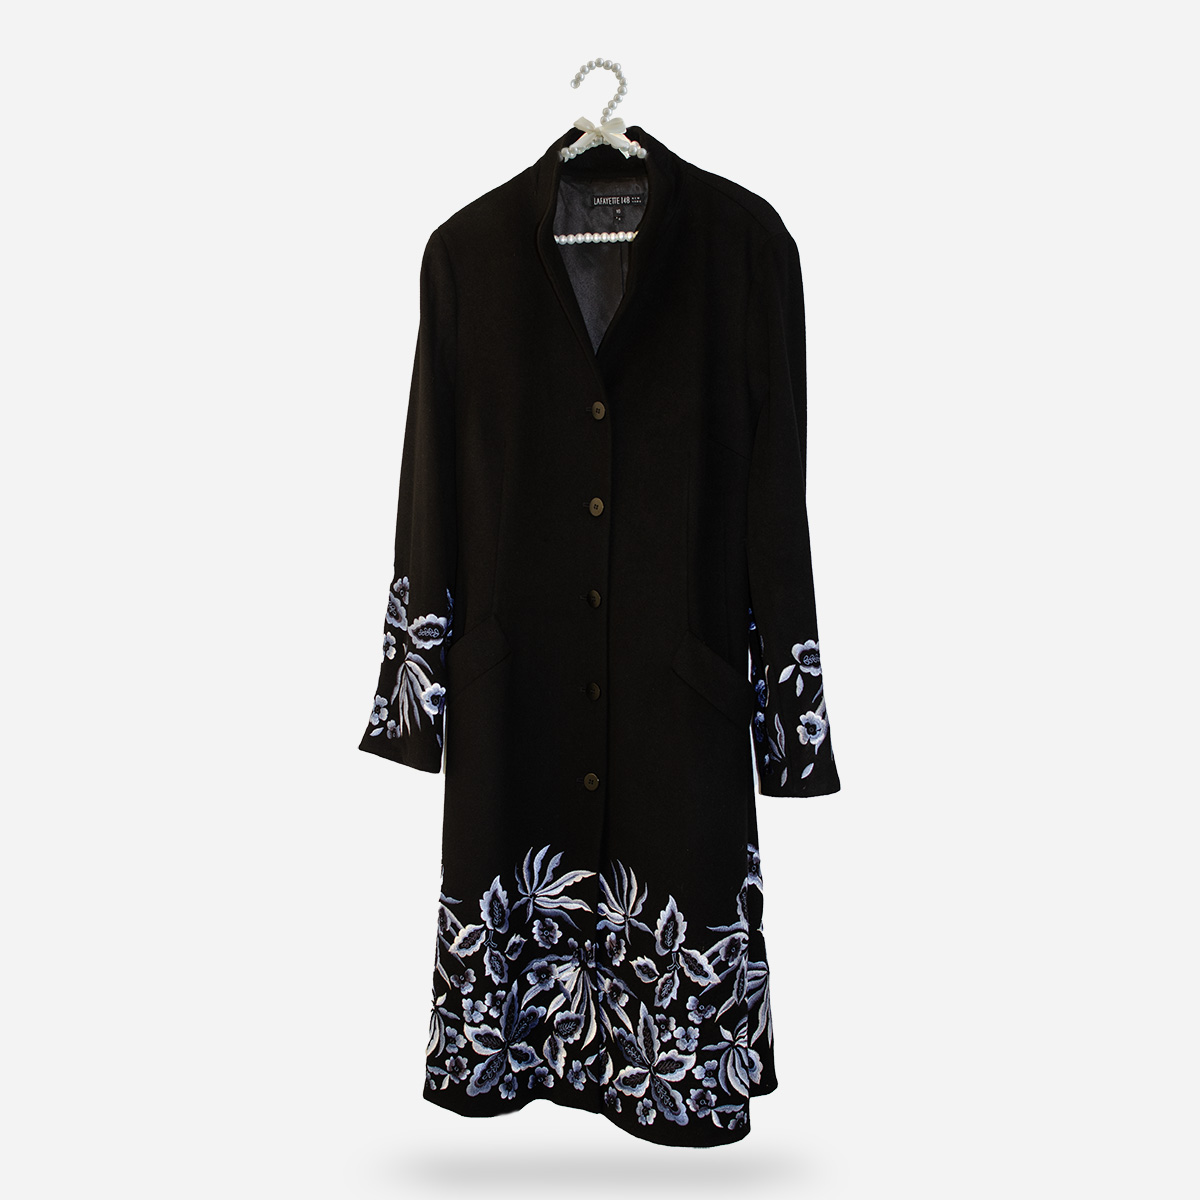 Womens Black Cashmere Coat by Lafayette 148, Blue Embroidery